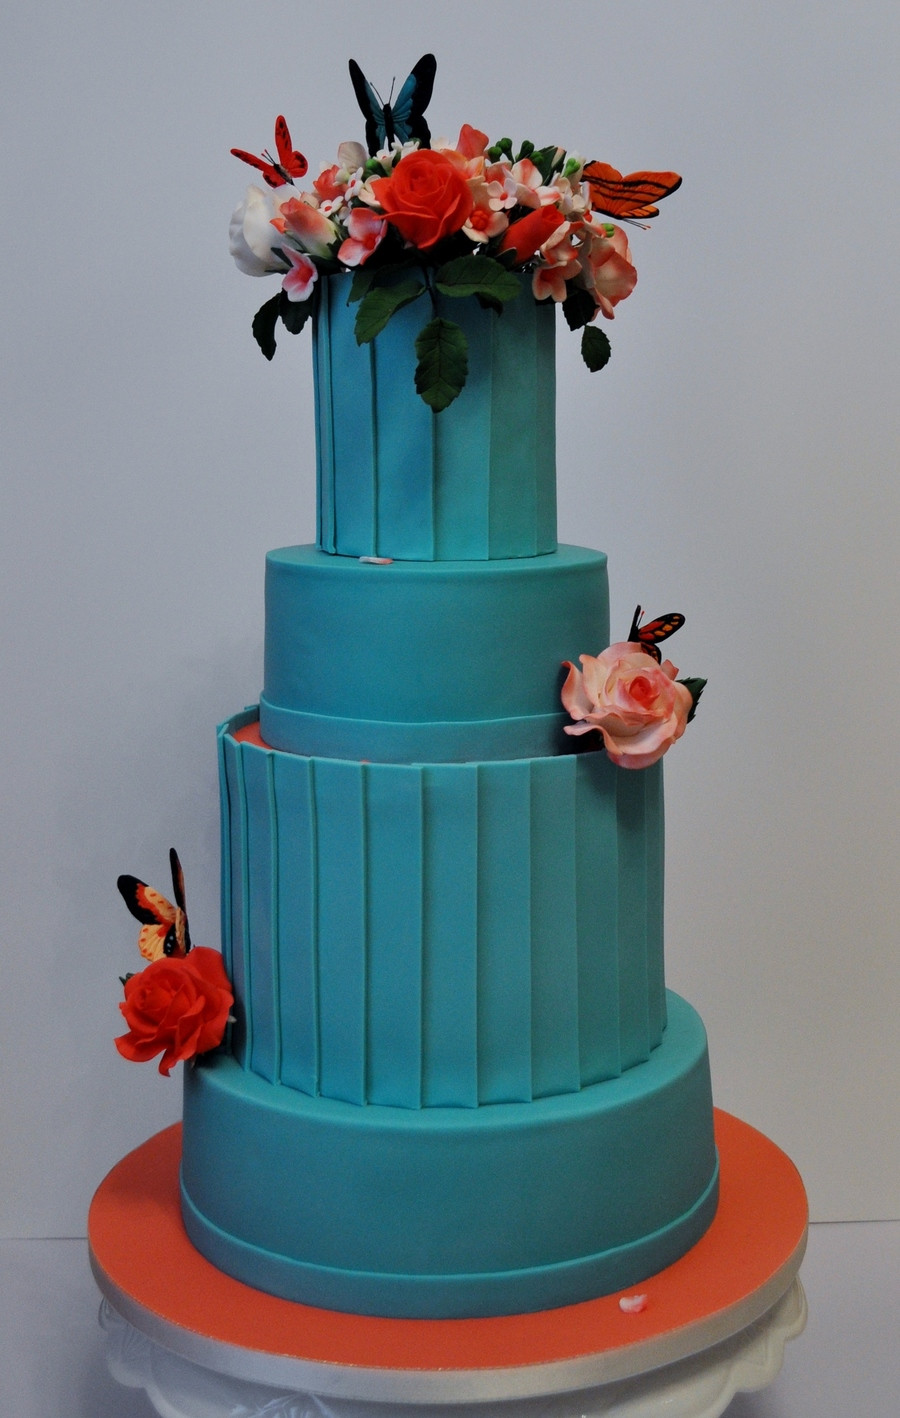 Turquoise And Coral Wedding Cakes
 Turquoise coral Wedding Cake CakeCentral